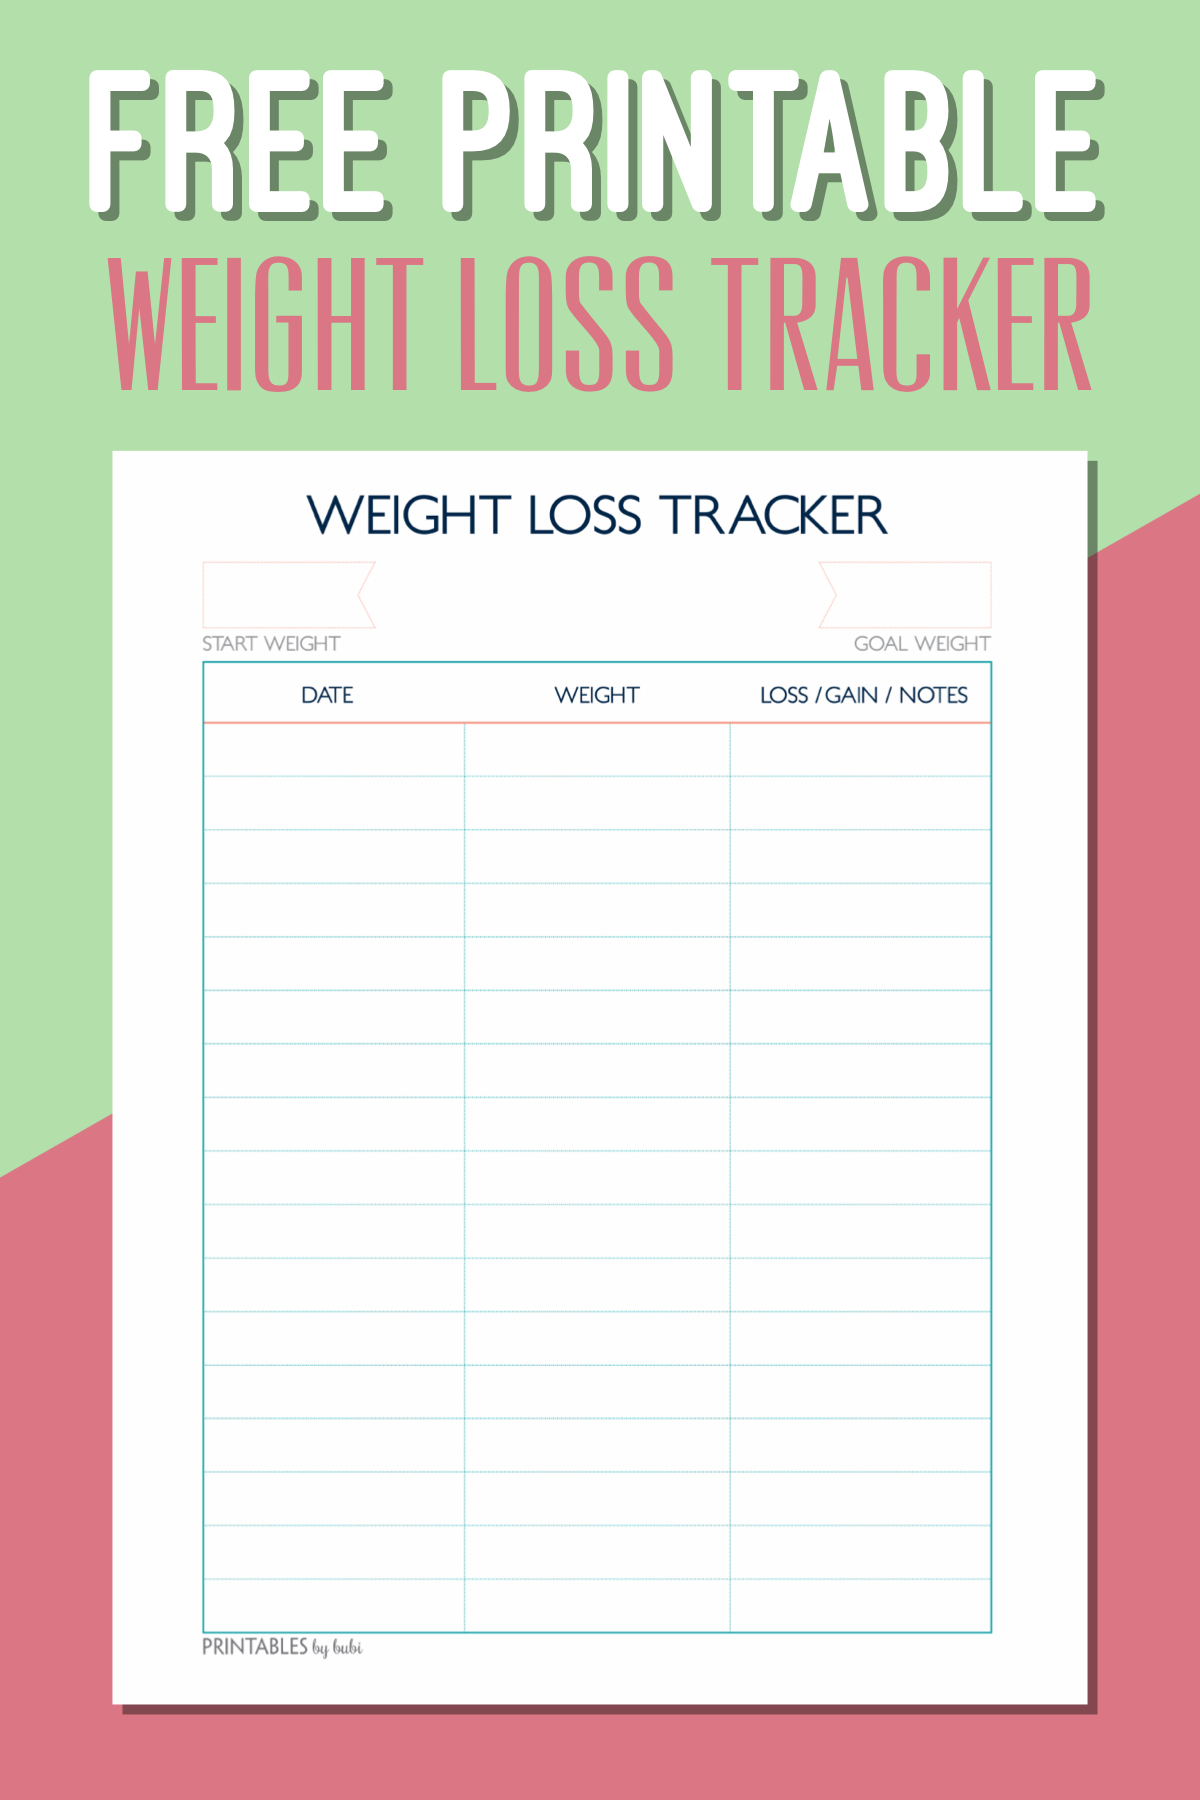 Free Printable Weight Loss Tracker – Instant Download Pdf - Free Printable Weight Loss Tracker Chart